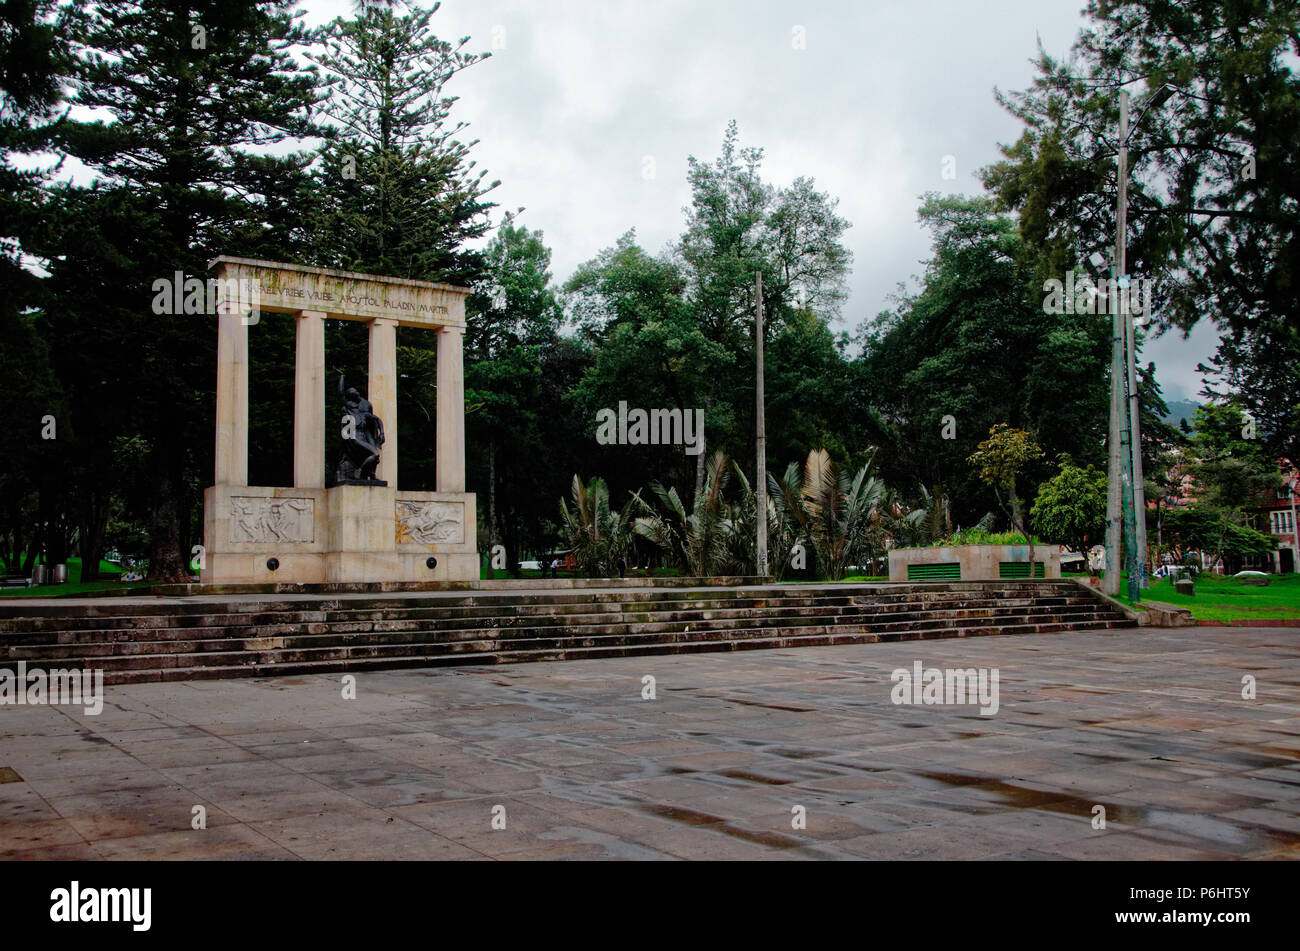 Statue surrounded by concrete pillars at the Parque Nacional, Bogota, Colombia Stock Photo